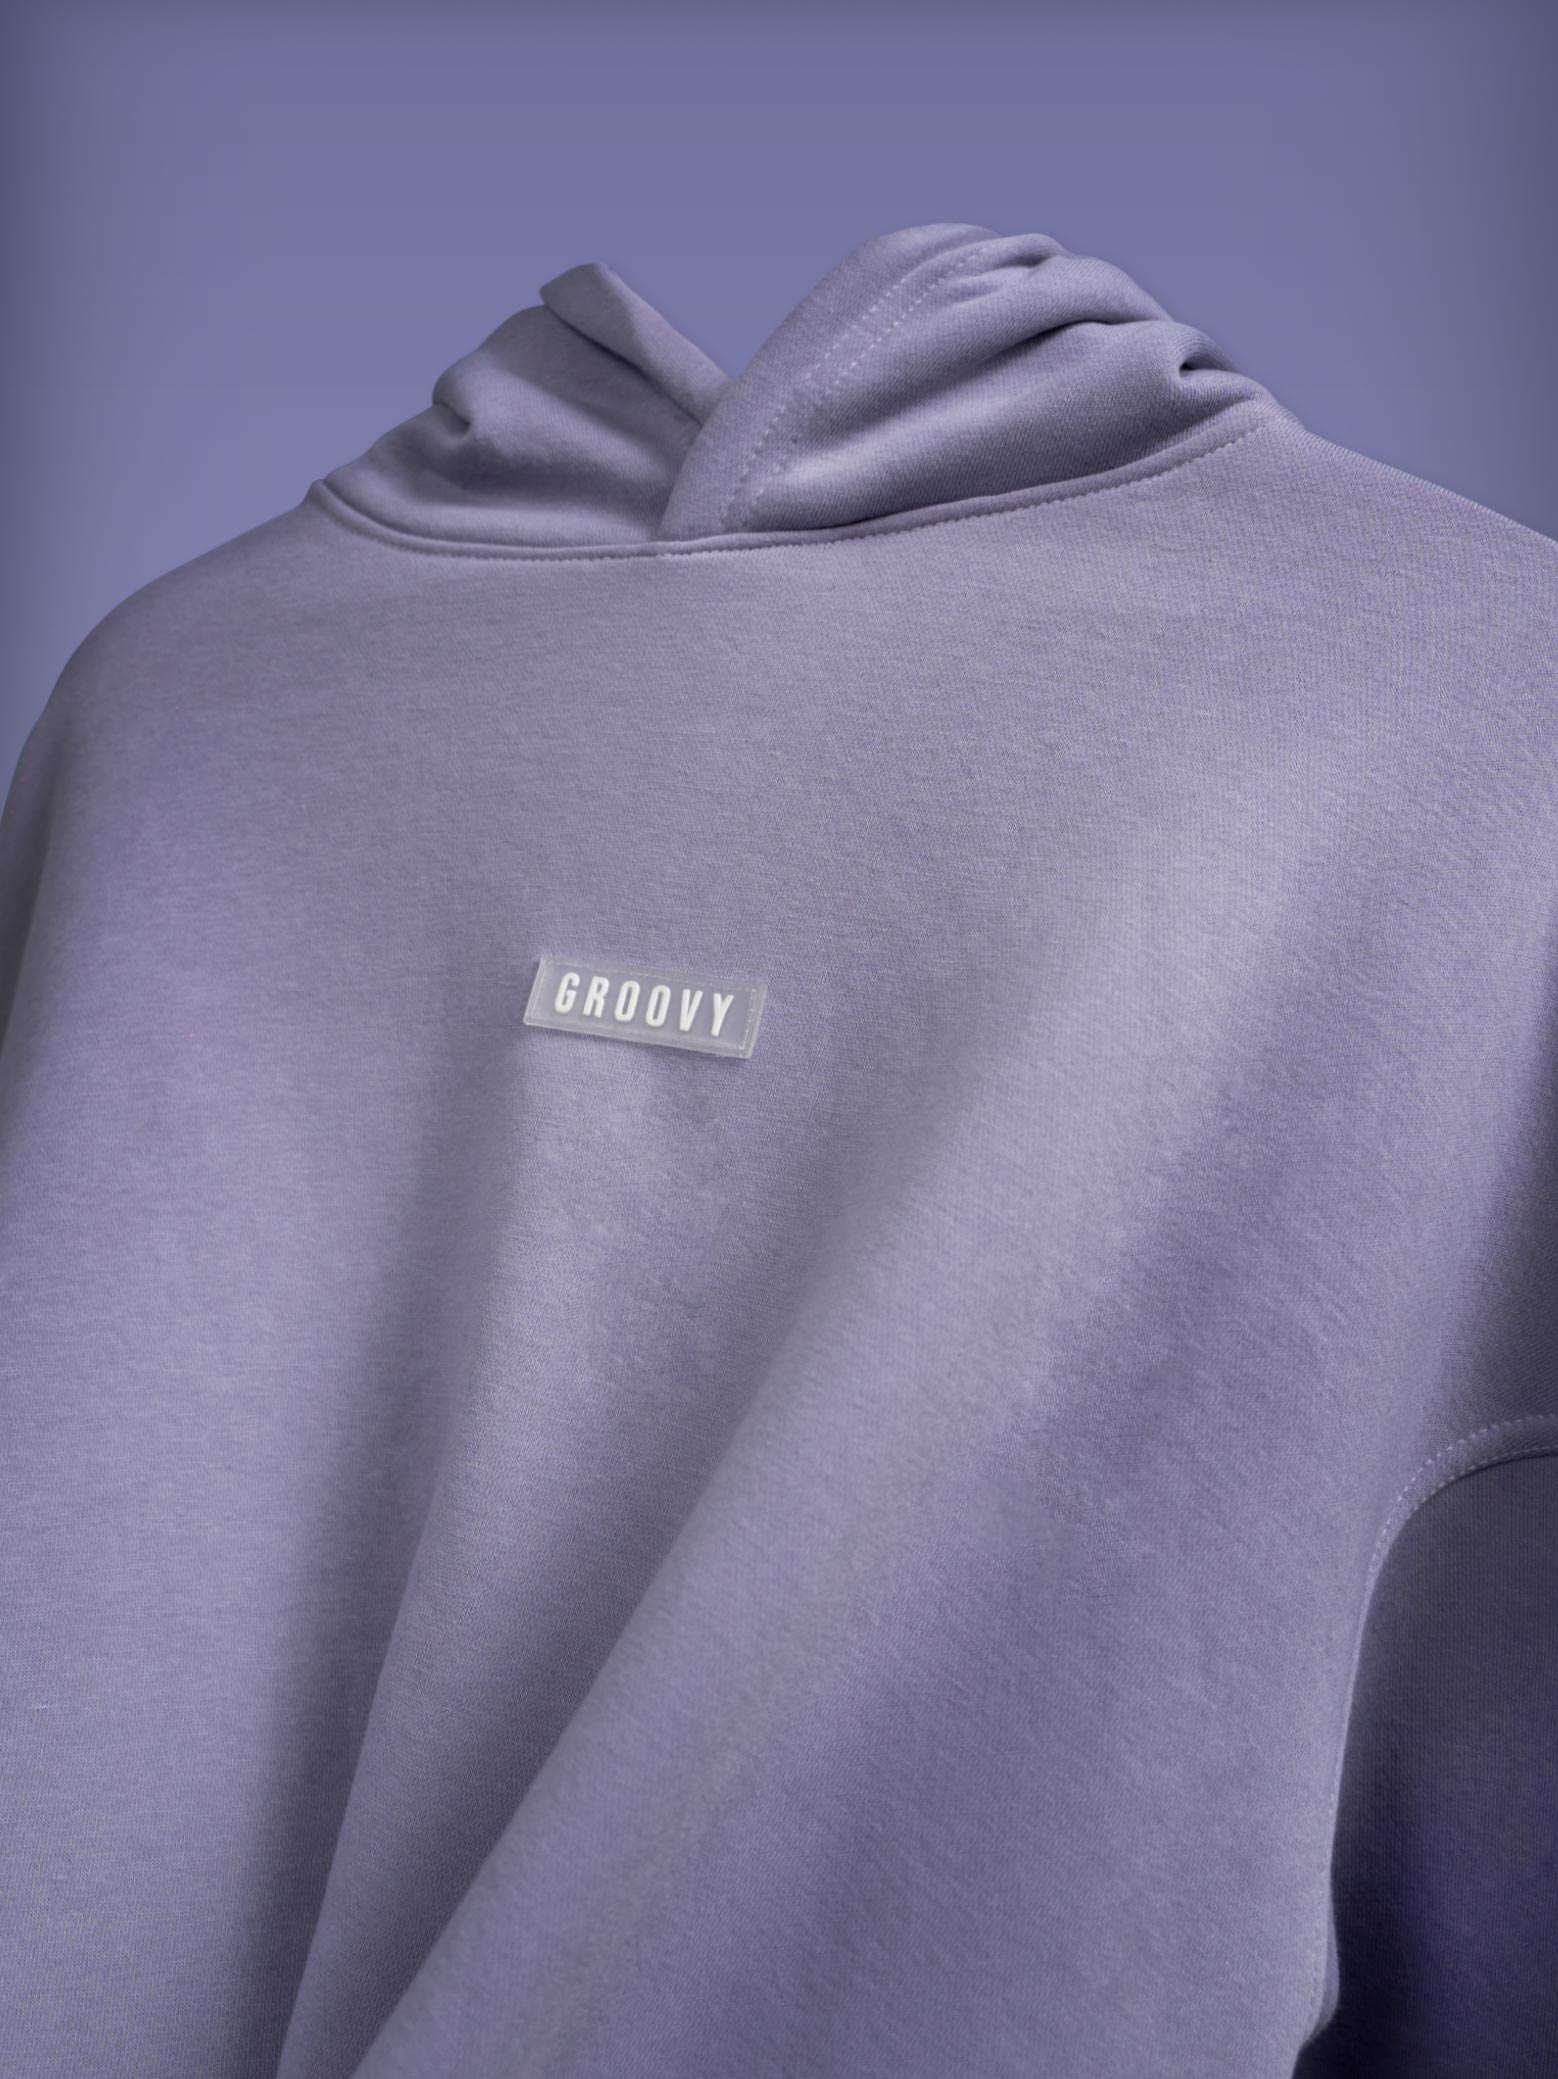 Lilac Oversized Hoodie